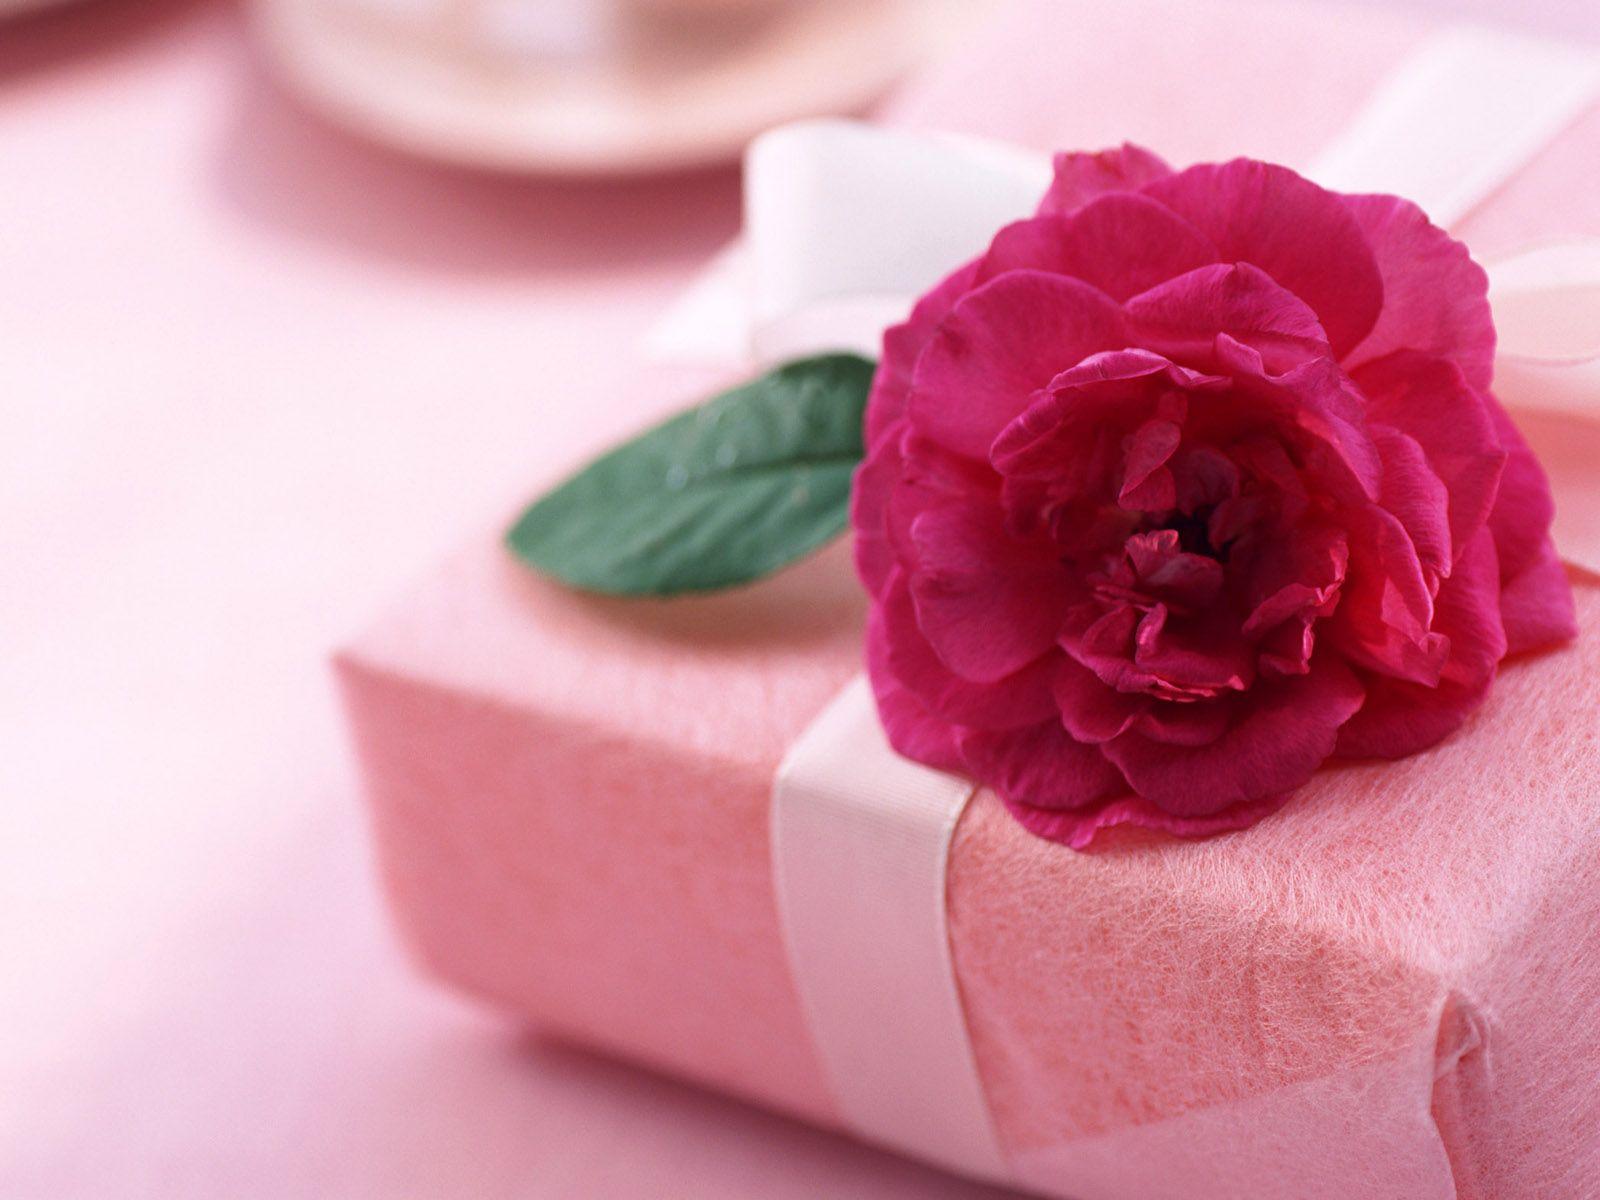 Gift of Love and Pink Flowers Wallpaper. HD Desktop Background